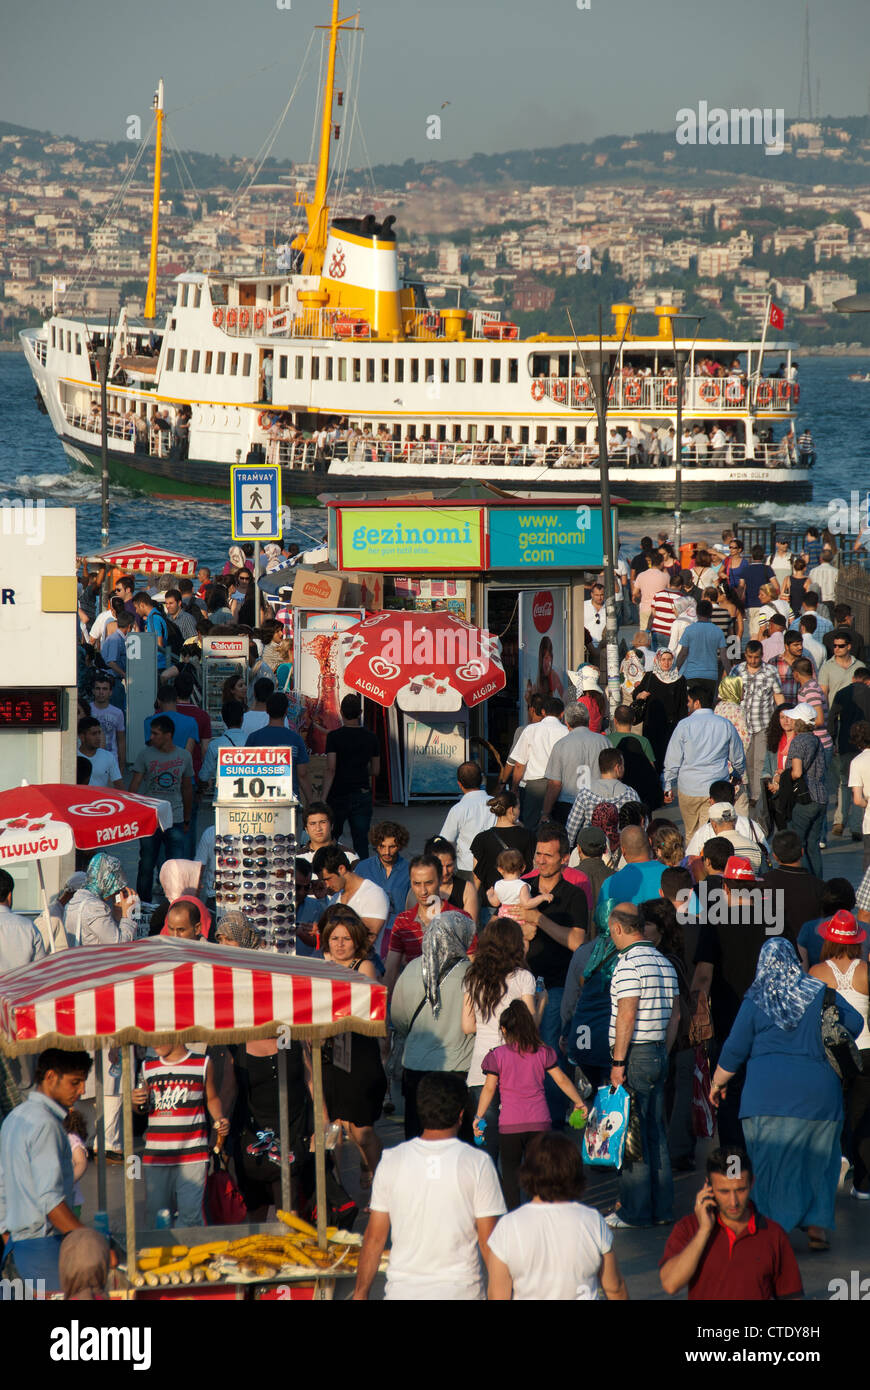 ISTANBUL, TURKEY. A lively, colourful scene at Eminonu ferry terminal on the Golden Horn. 2012. Stock Photo